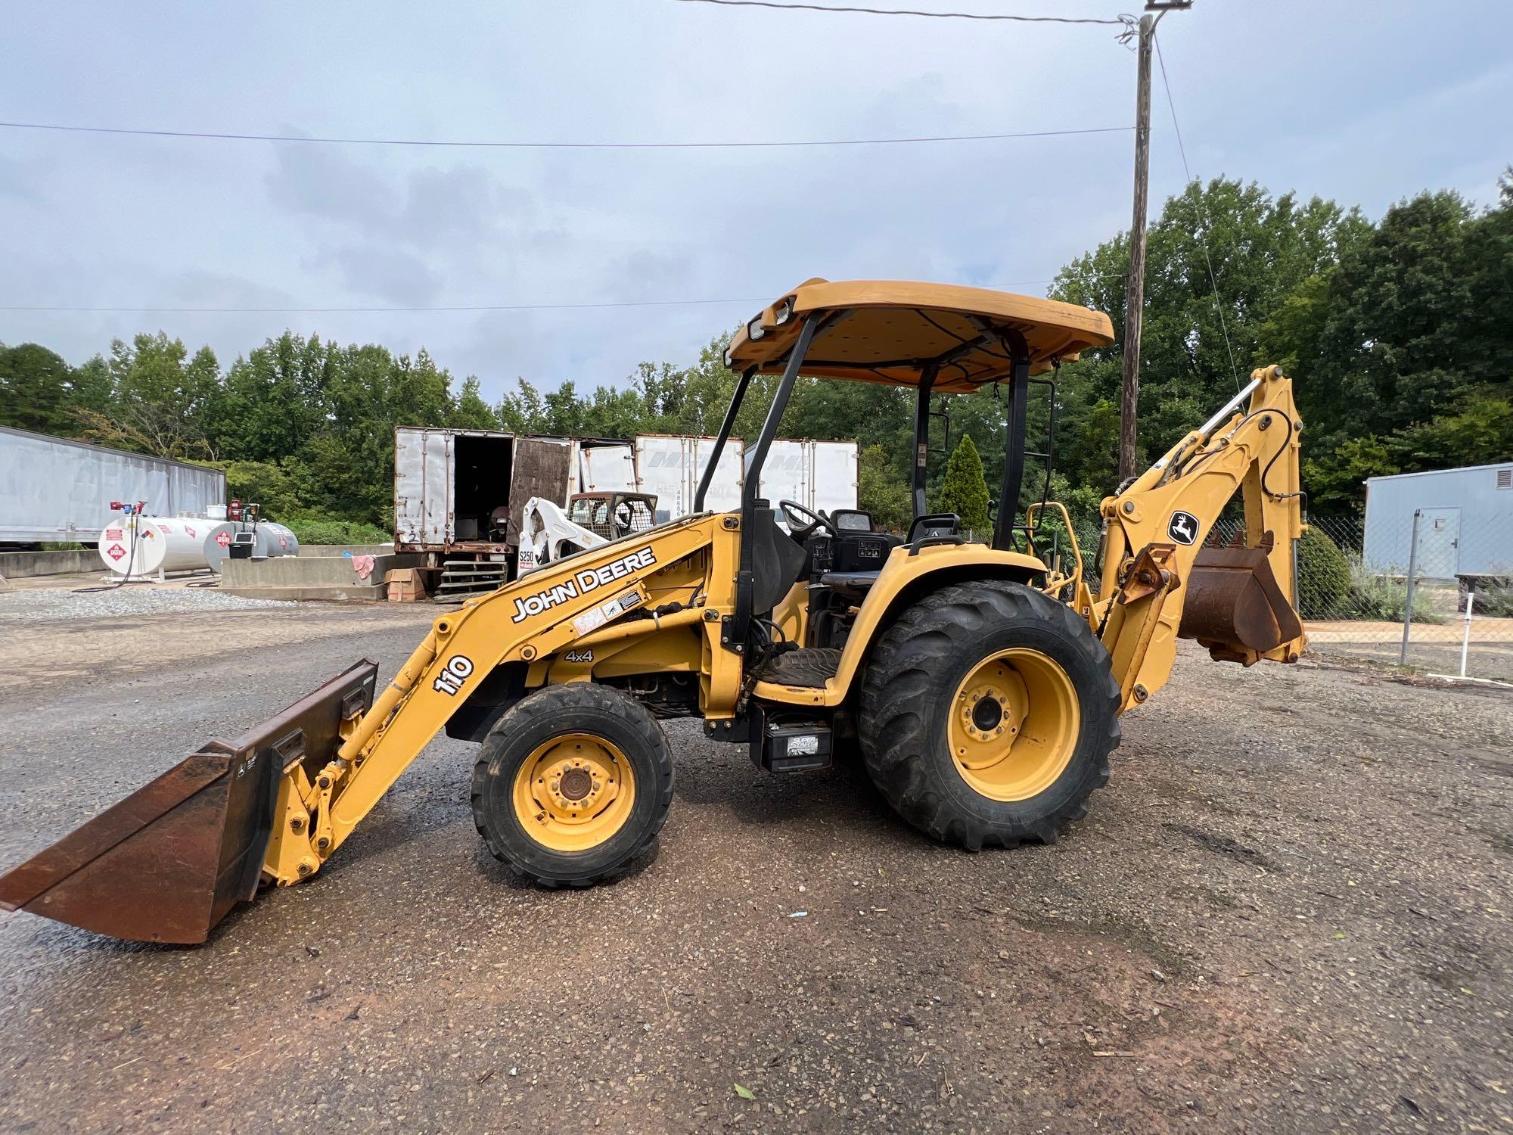 Landscaping/Construction Equipment, Trucks, Trailers and More!